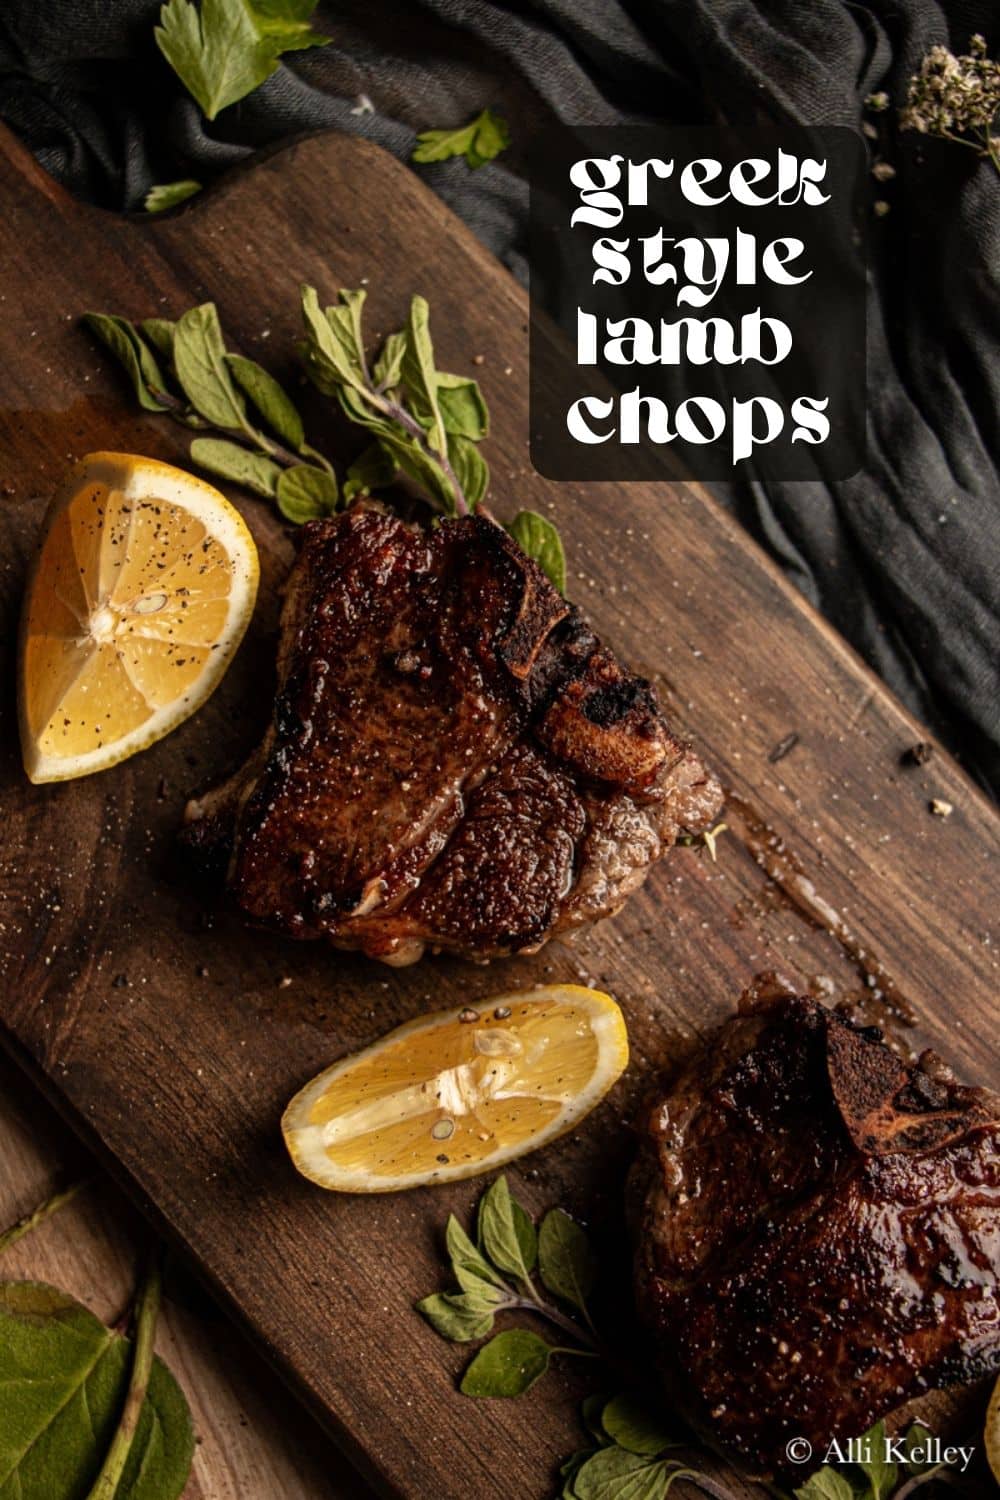 Lamb is one of the most popular meats in Greek cuisine, and with good reason: it's packed with flavor and is so versatile. These Greek lamb chops are smothered in a traditional marinade of fresh lemon juice, garlic, olive oil, and herbs. The result is a zesty, juicy, and delicious dinner your family will love!